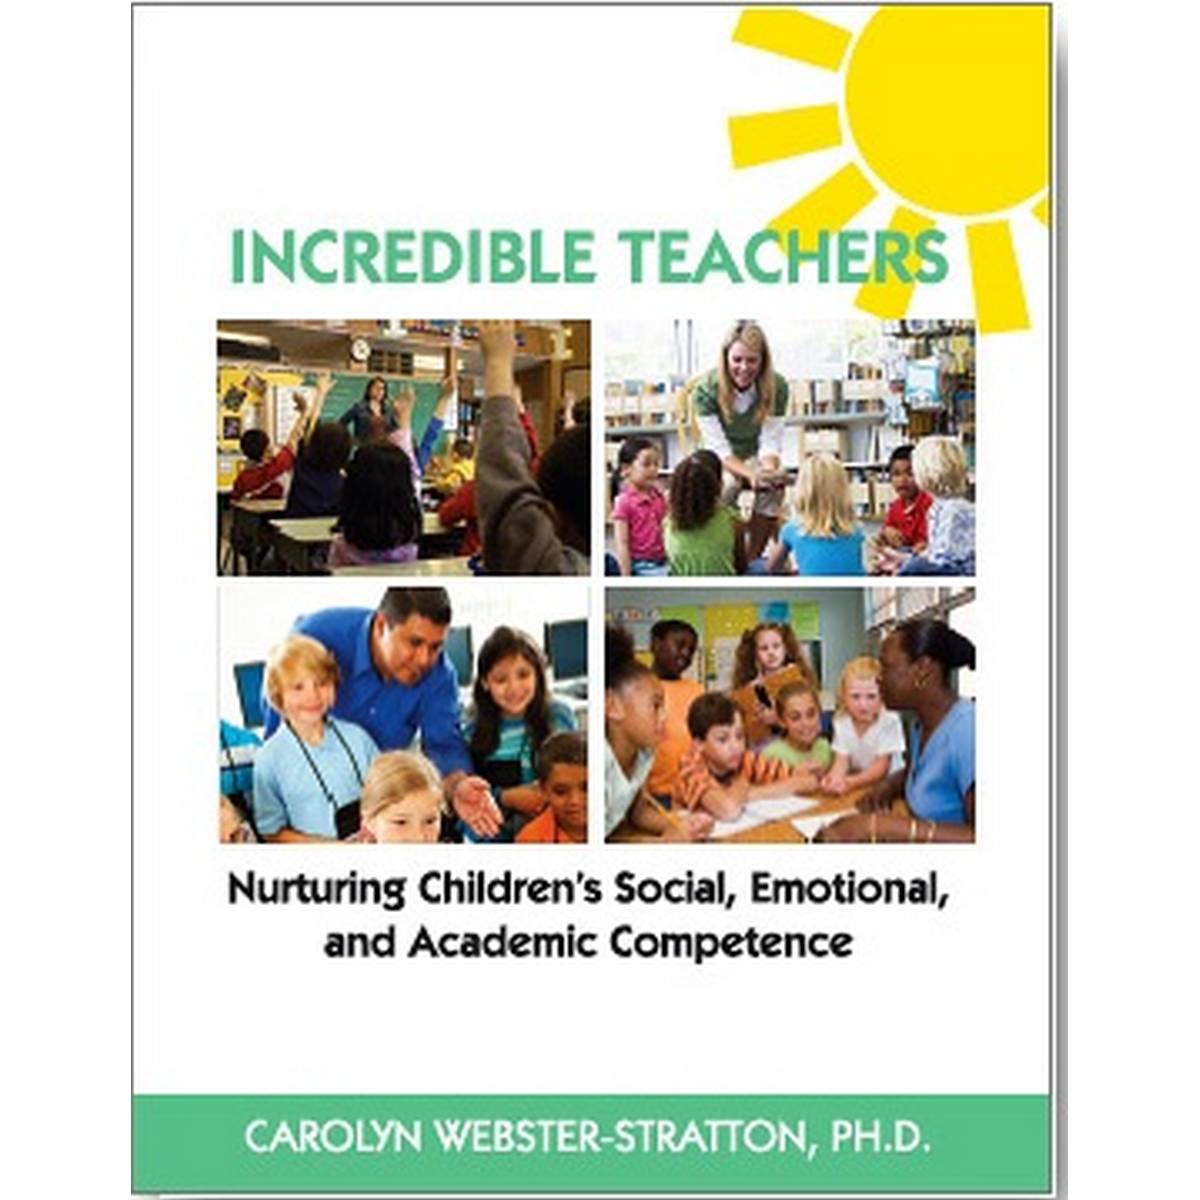 Incredible Teachers: Nurturing Children's Social, Emotional, and Academic Competence